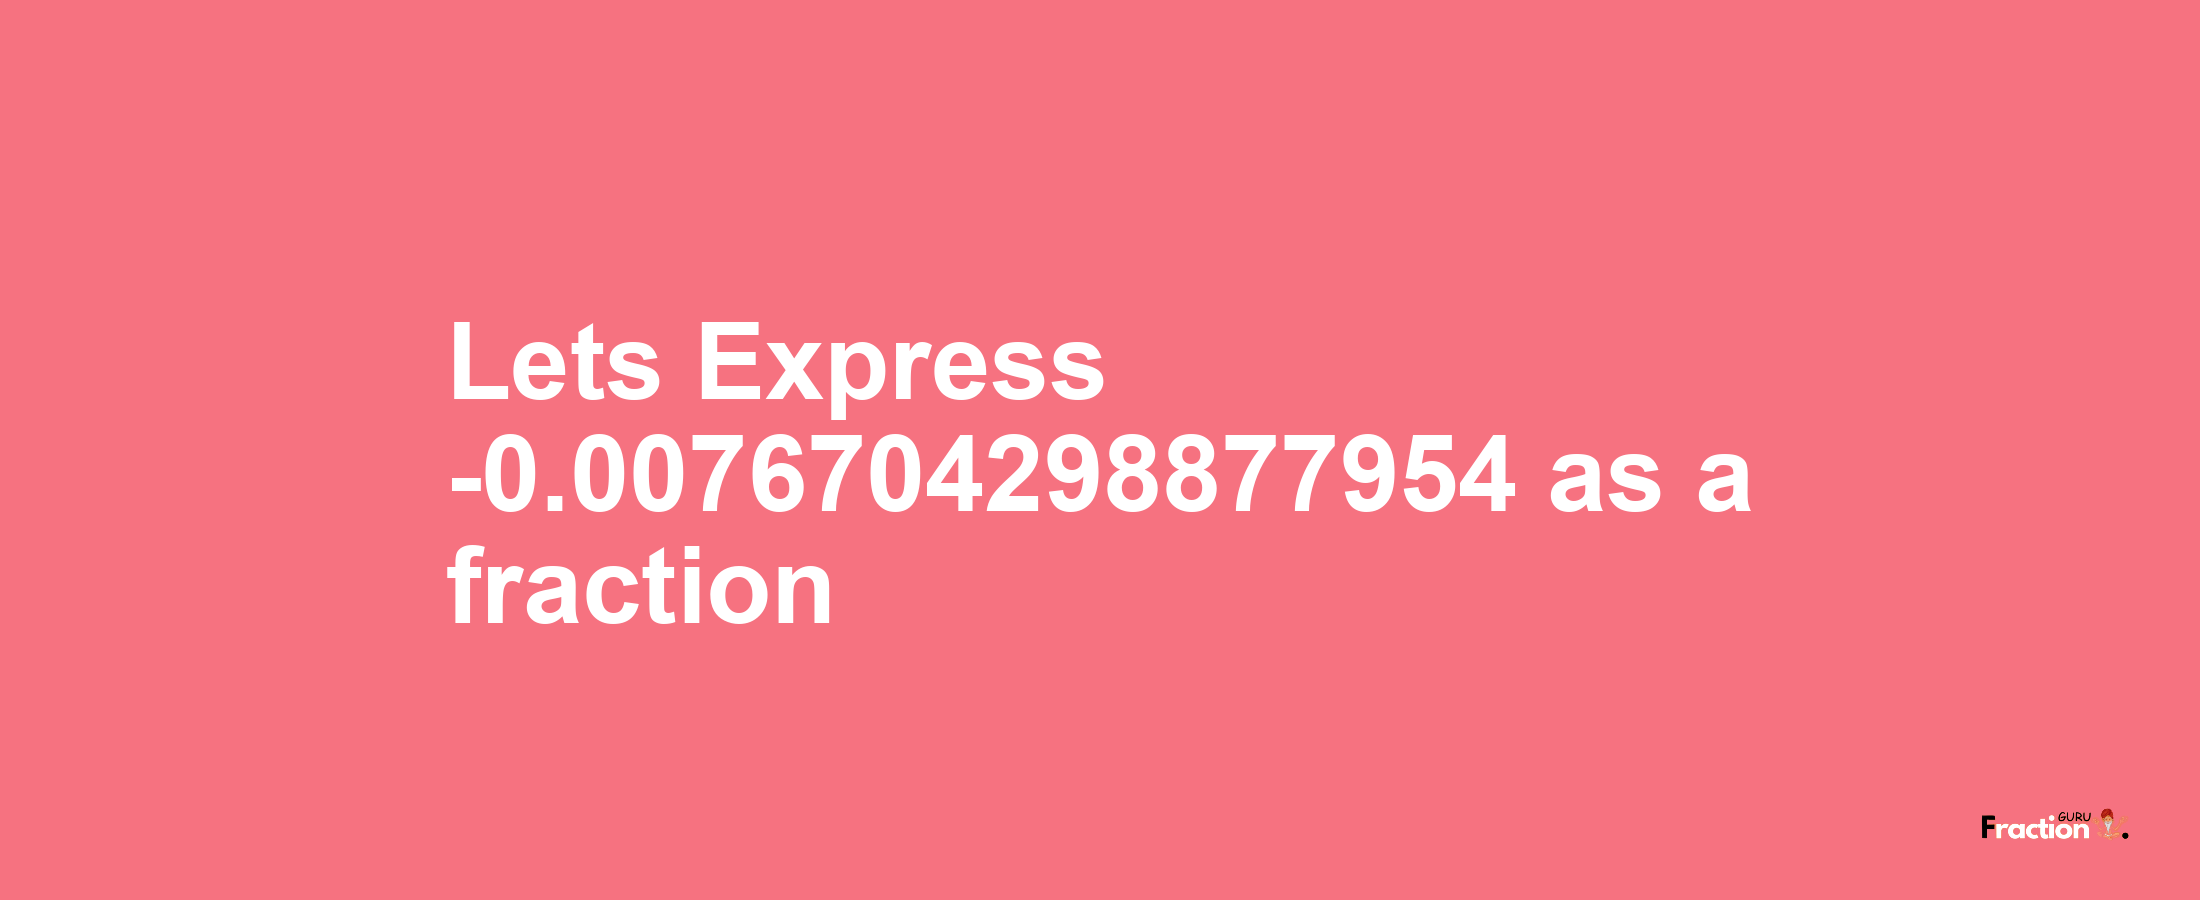 Lets Express -0.0076704298877954 as afraction